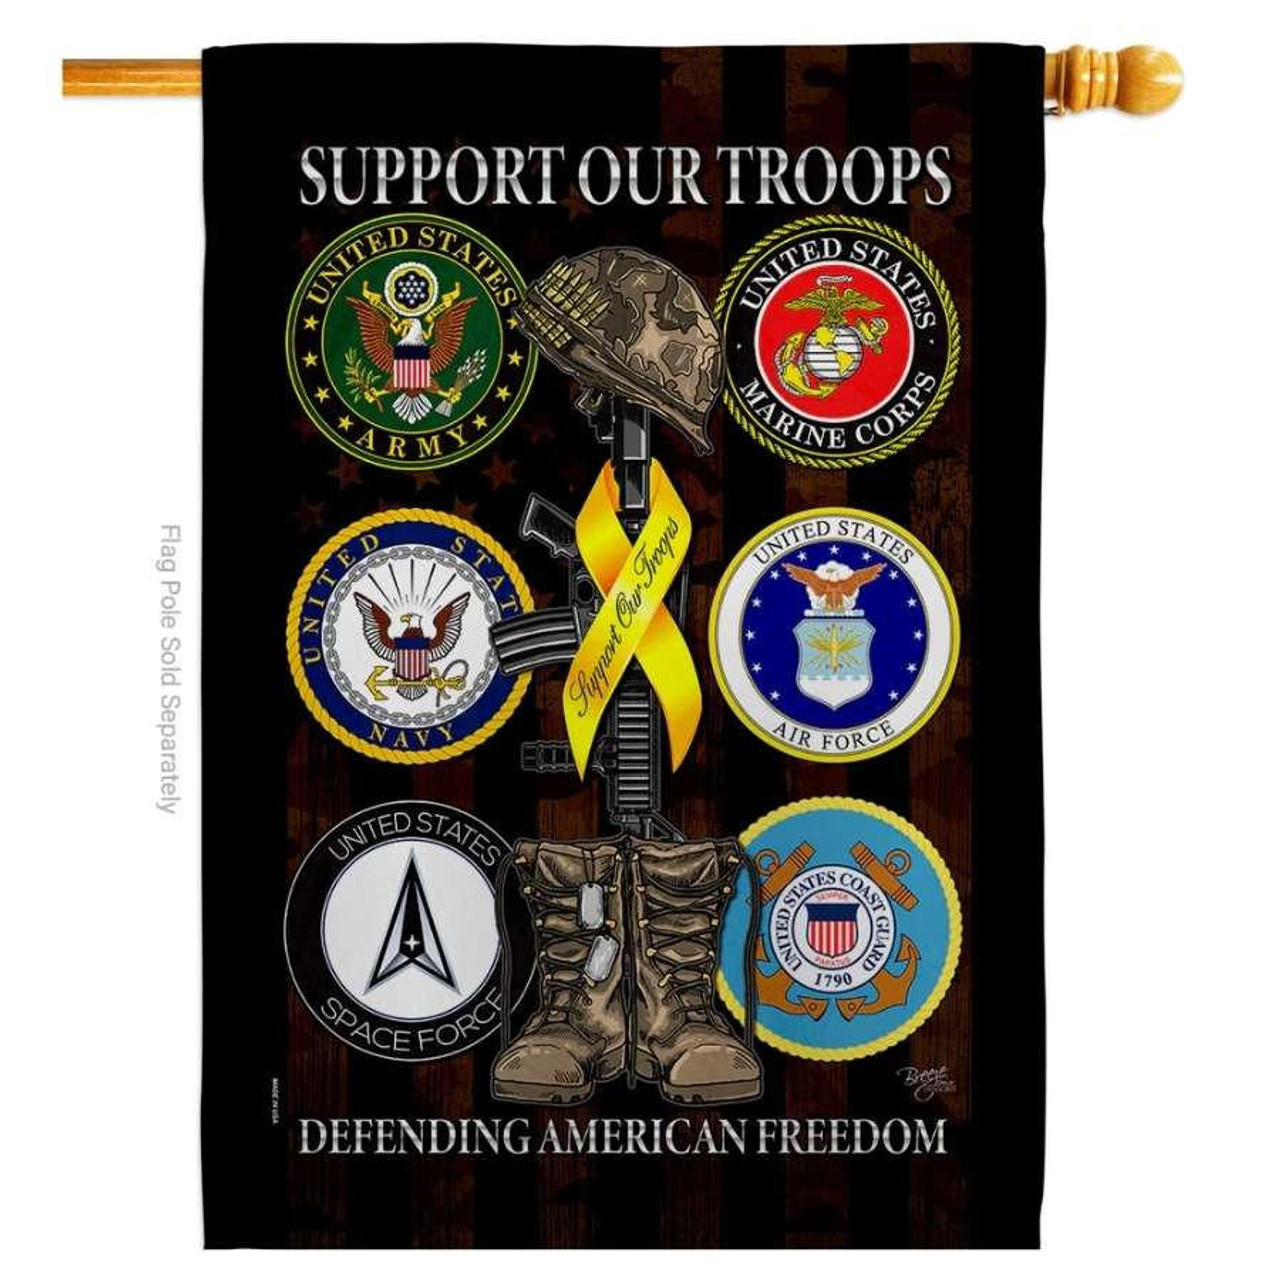 A decorative house flag featuring all 6 seals for the branches of the US Armed forces. The middle has combat boots, a rifle, and yellow ribbon. The top says "Support our Troops" and the bottom says "Defending American Freedom."